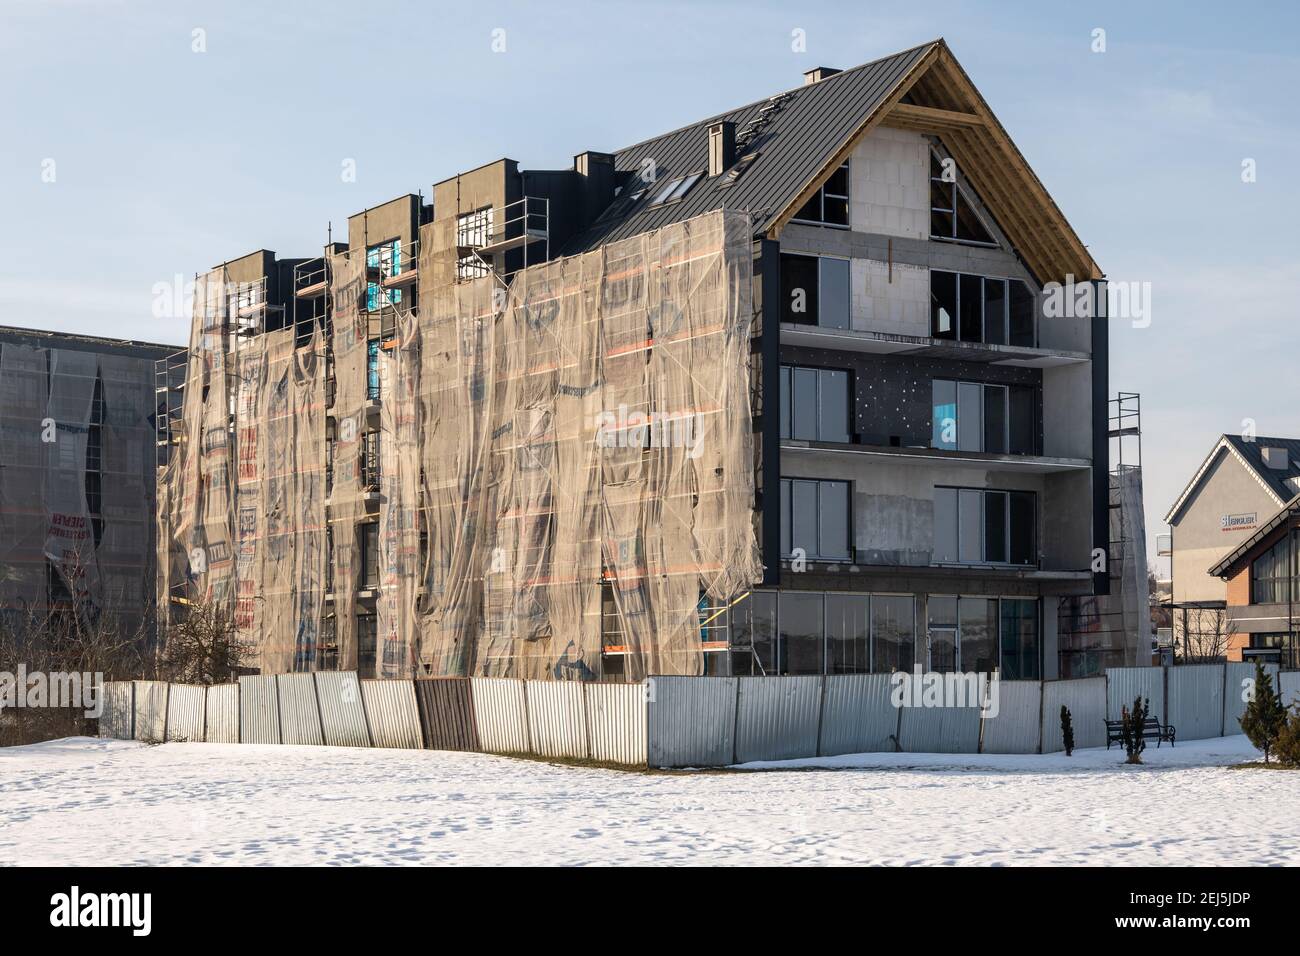 Tczew, Poland - February 21, 2021: Modern building under construction right on the Vistula River in Tczew Stock Photo